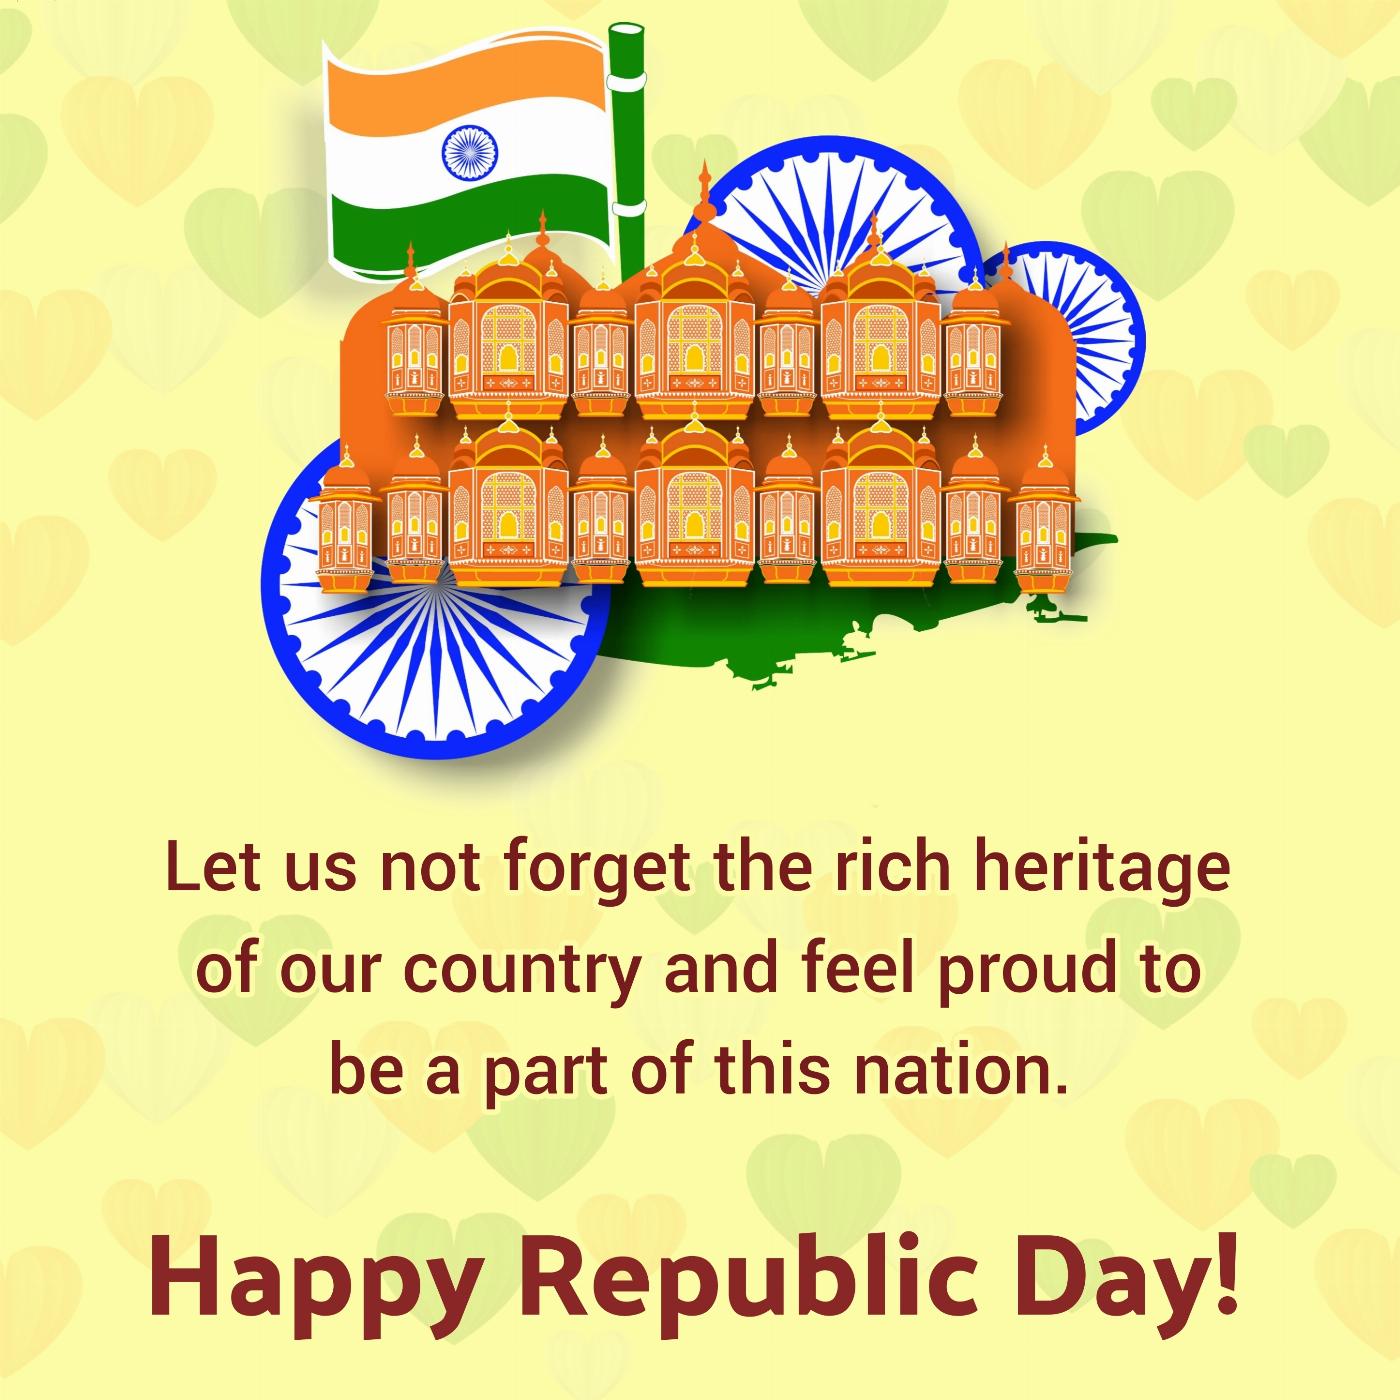 Let us not forget the rich heritage of our country